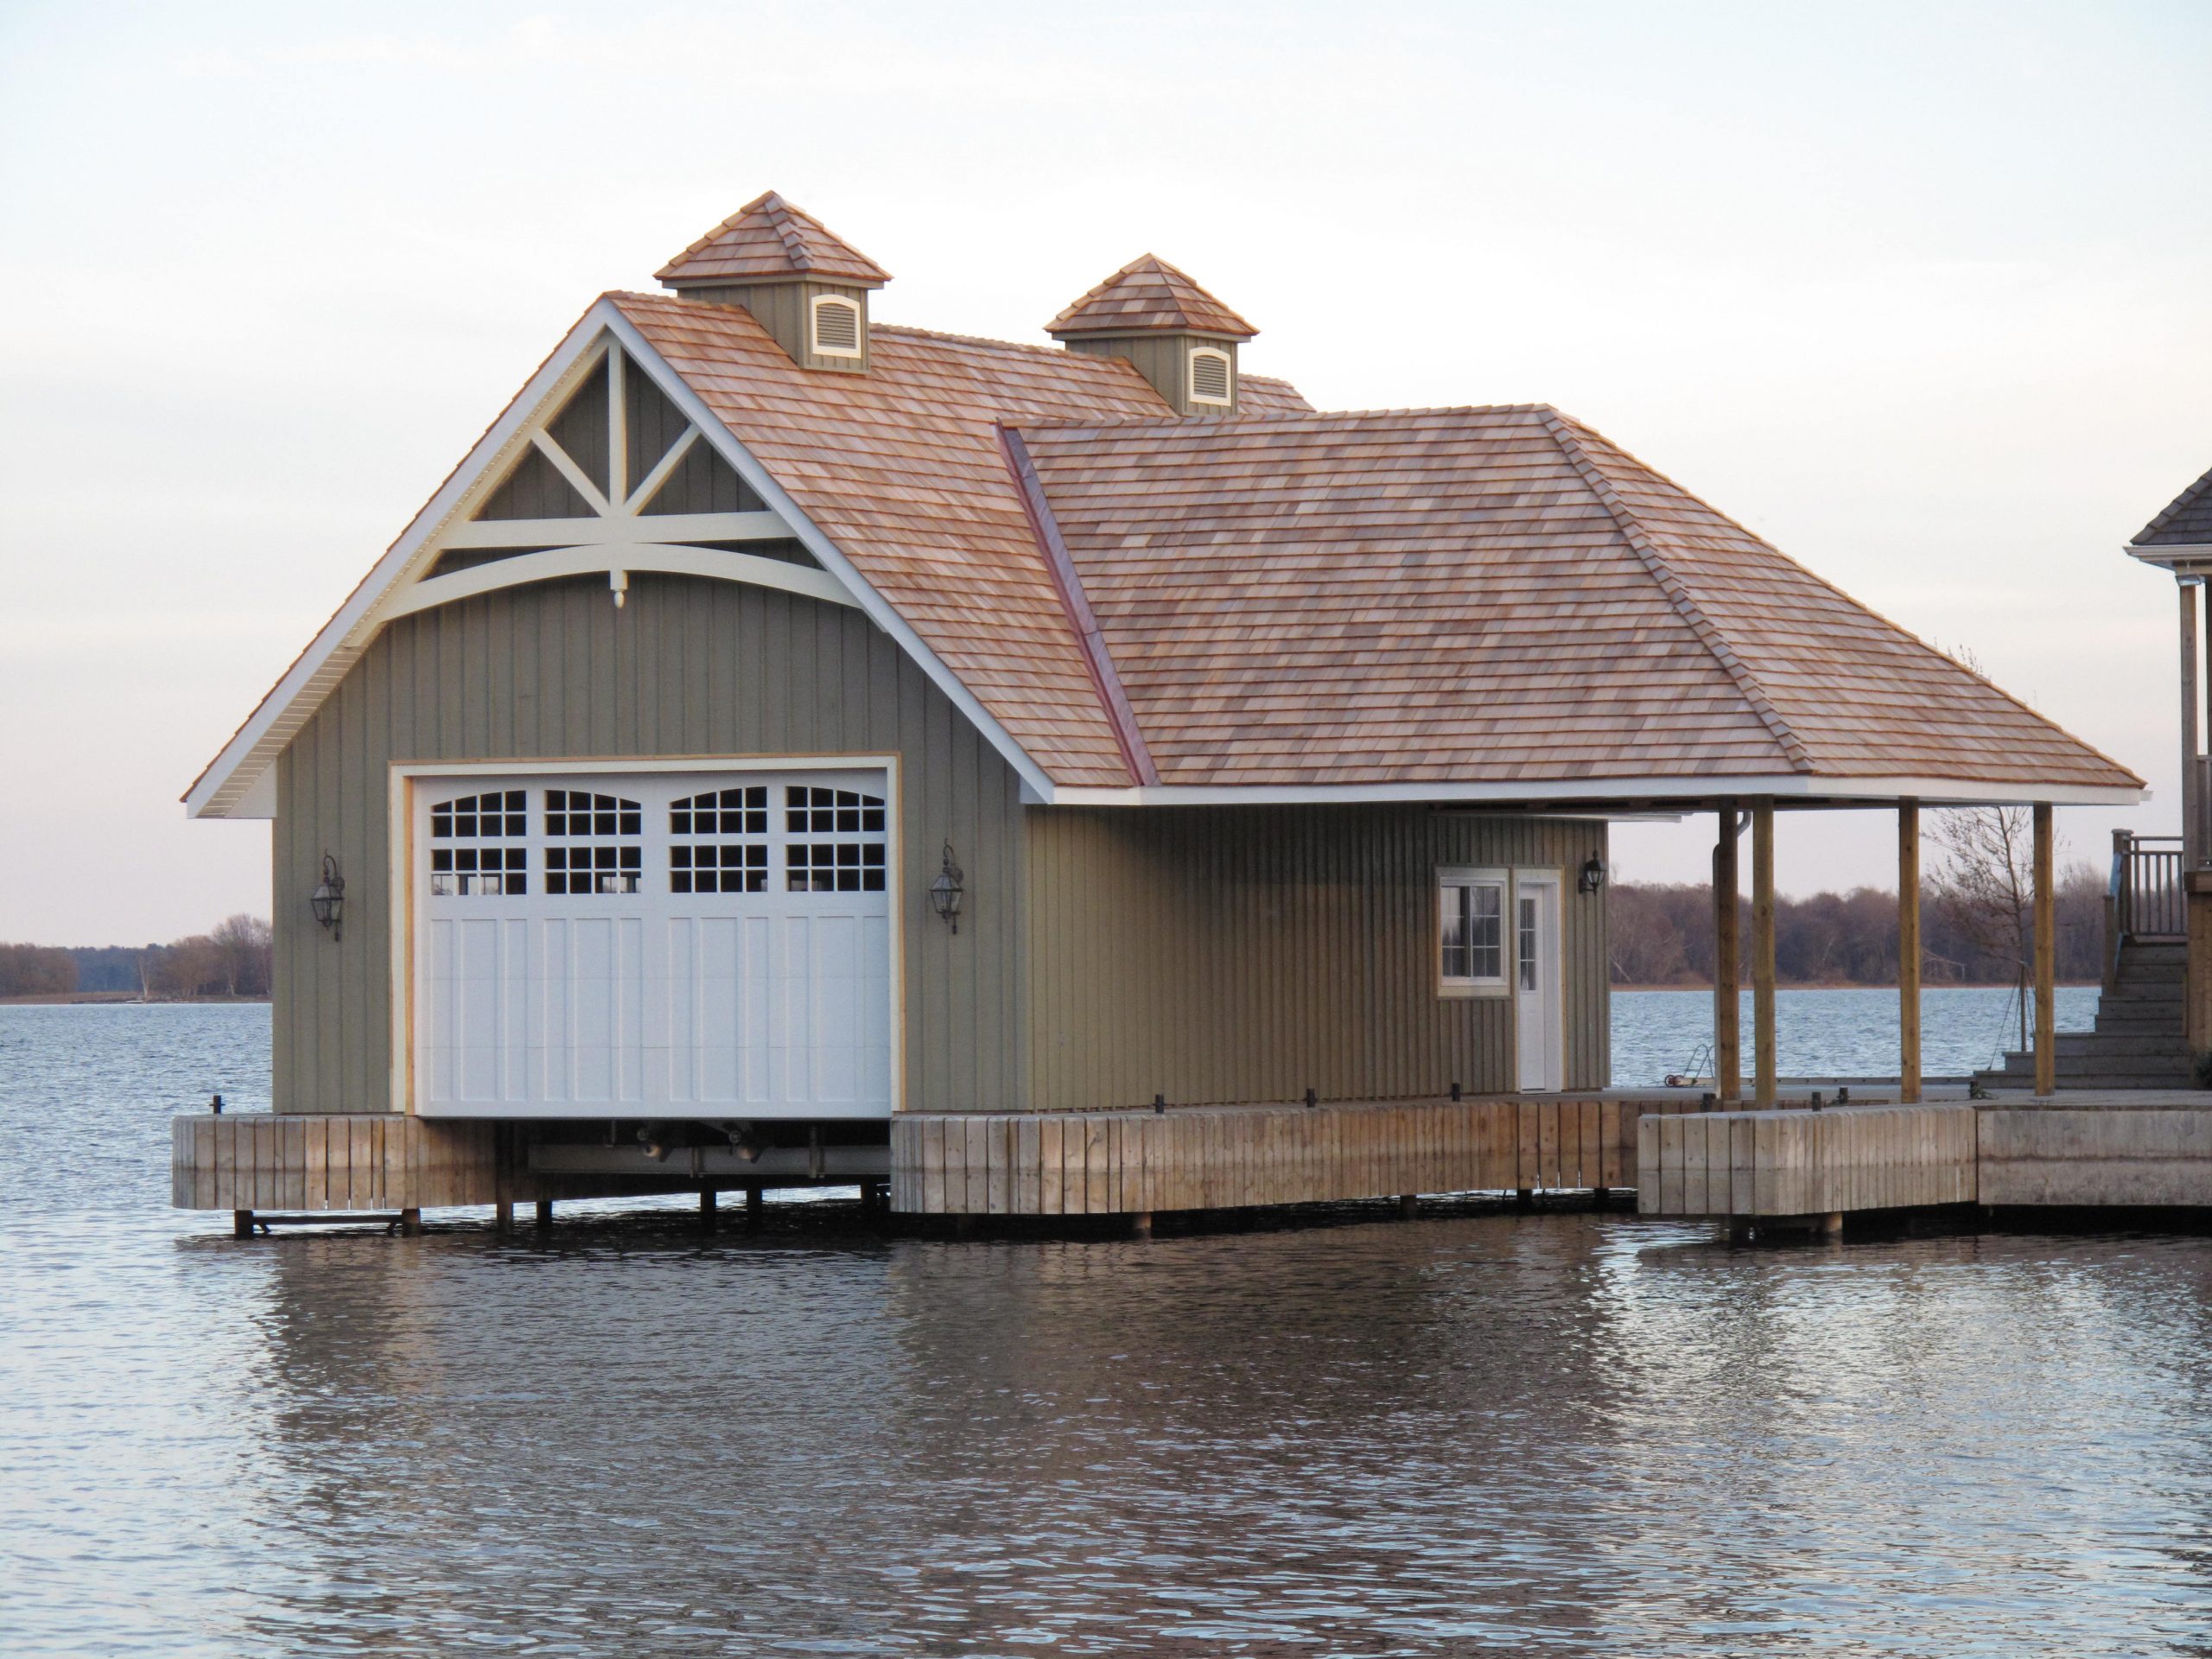 Boathouse door in white with windows